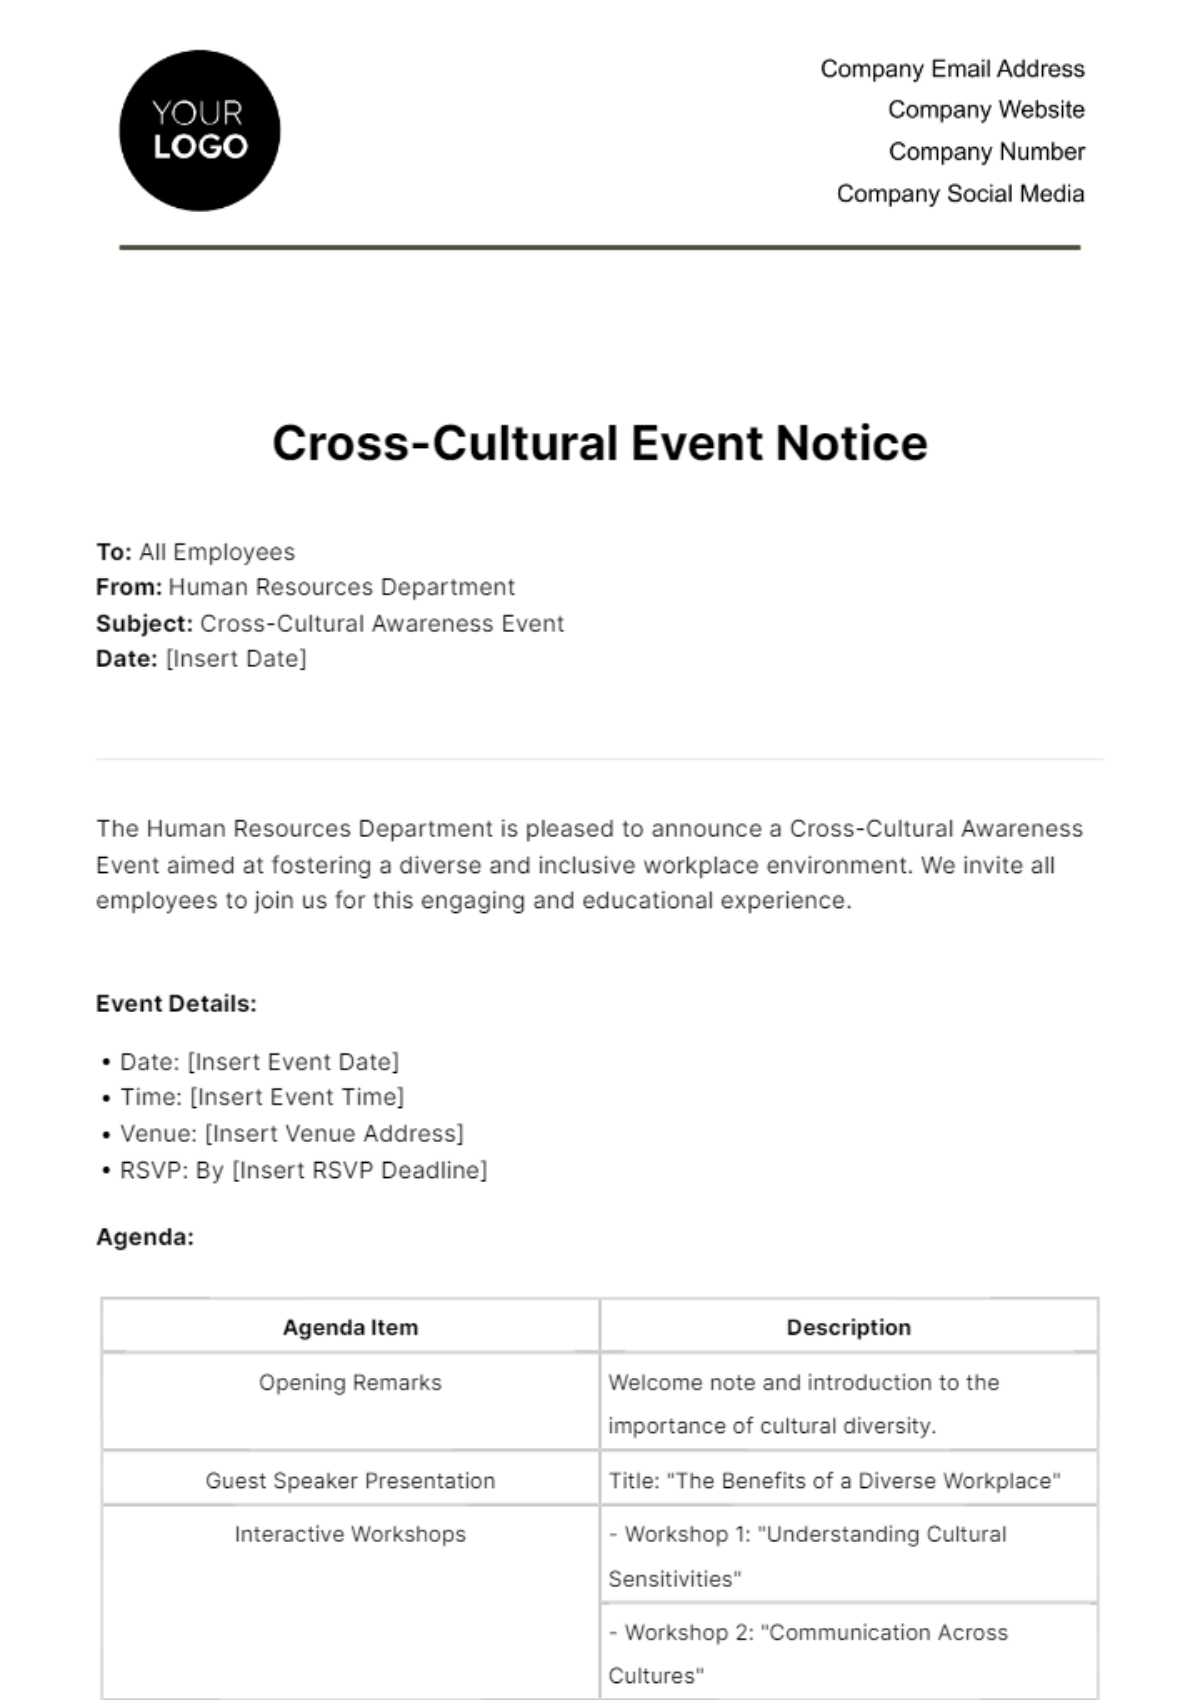 Free Cross-Cultural Event Notice HR Template